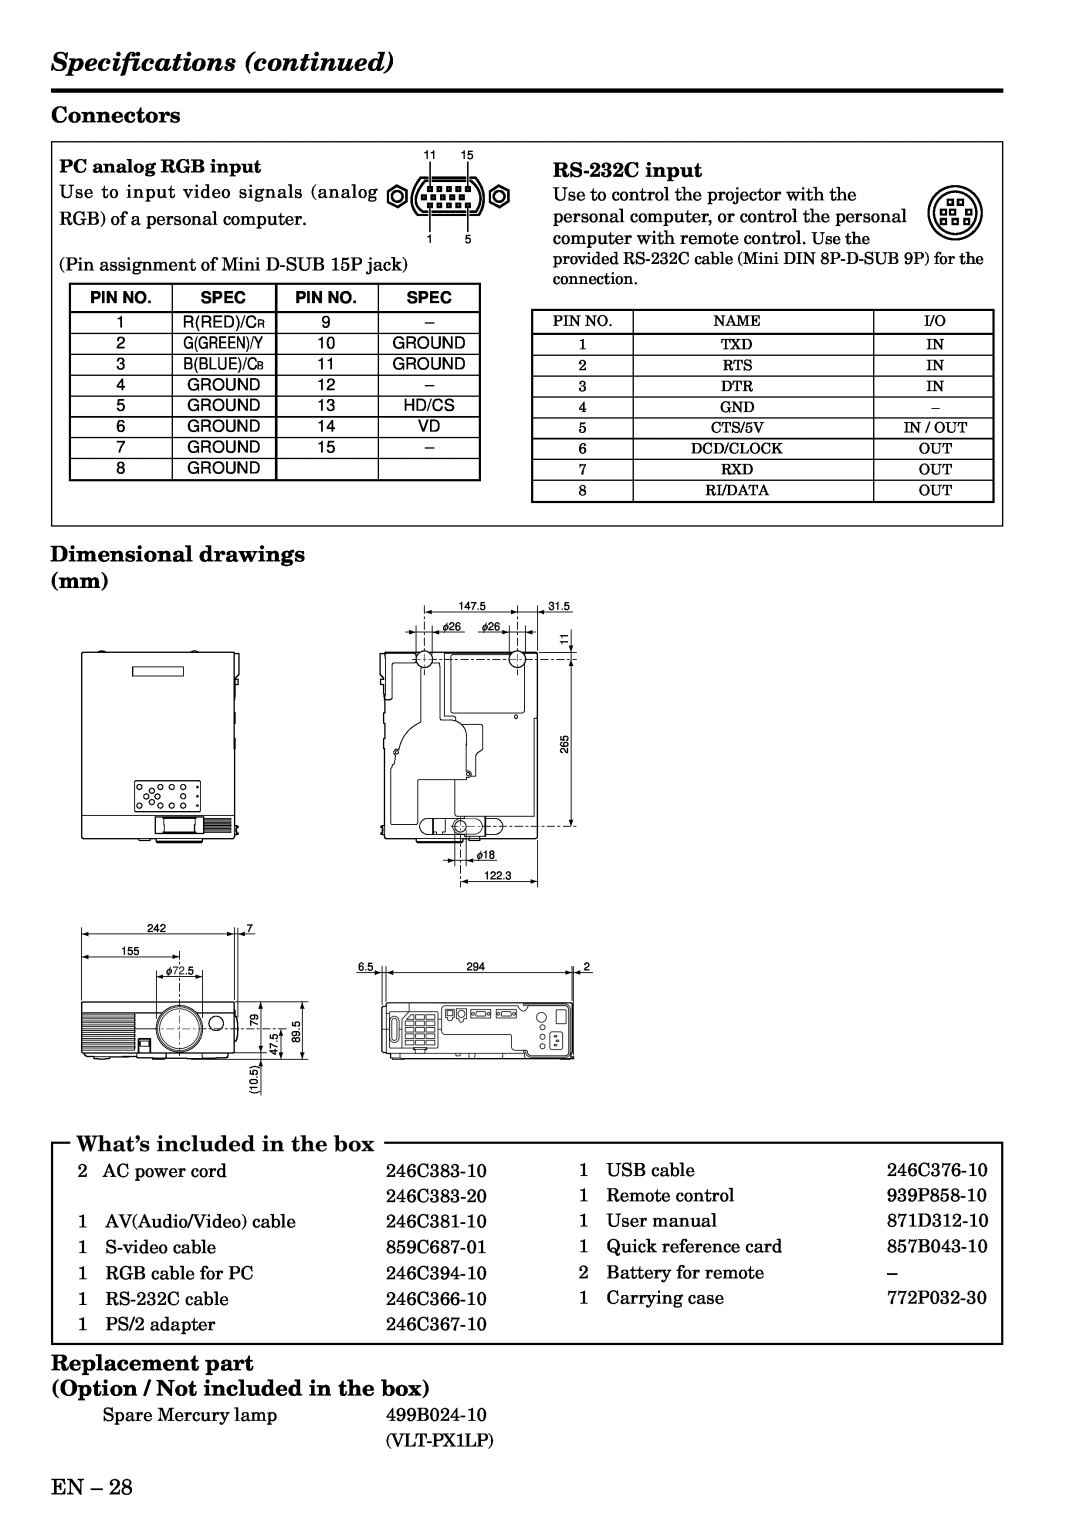 Mitsubishi Electronics X80 Specifications continued, Connectors, Dimensional drawings mm, What’s included in the box 